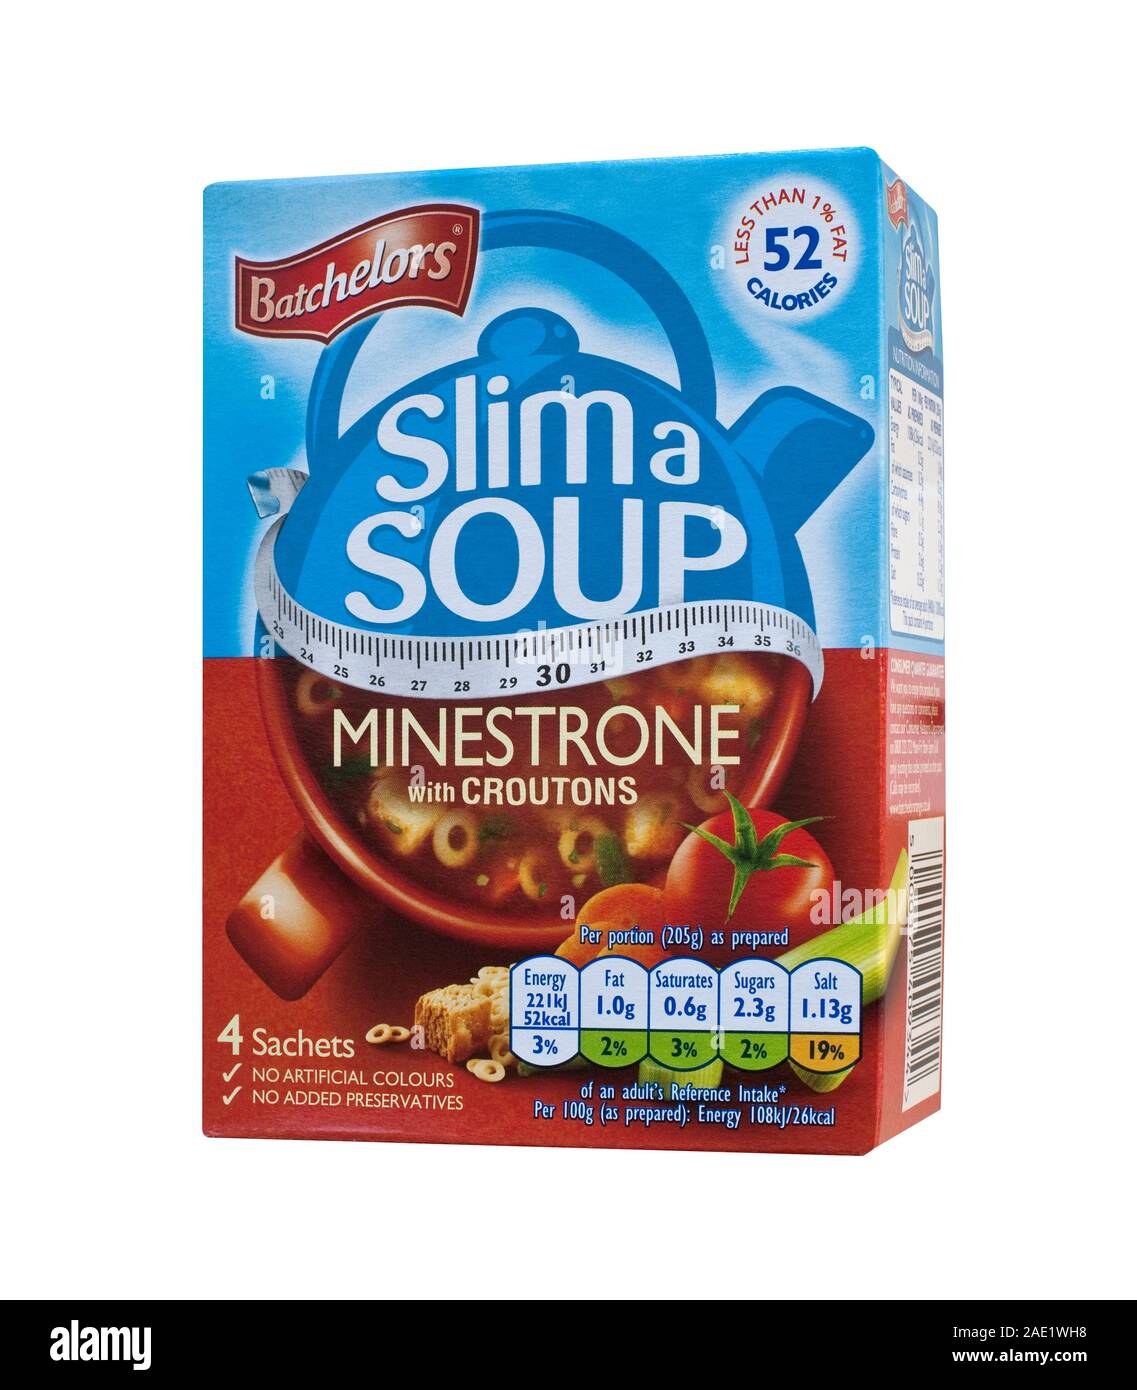 Batchelors slim a soup minestrone with croutons packet box Stock Photo